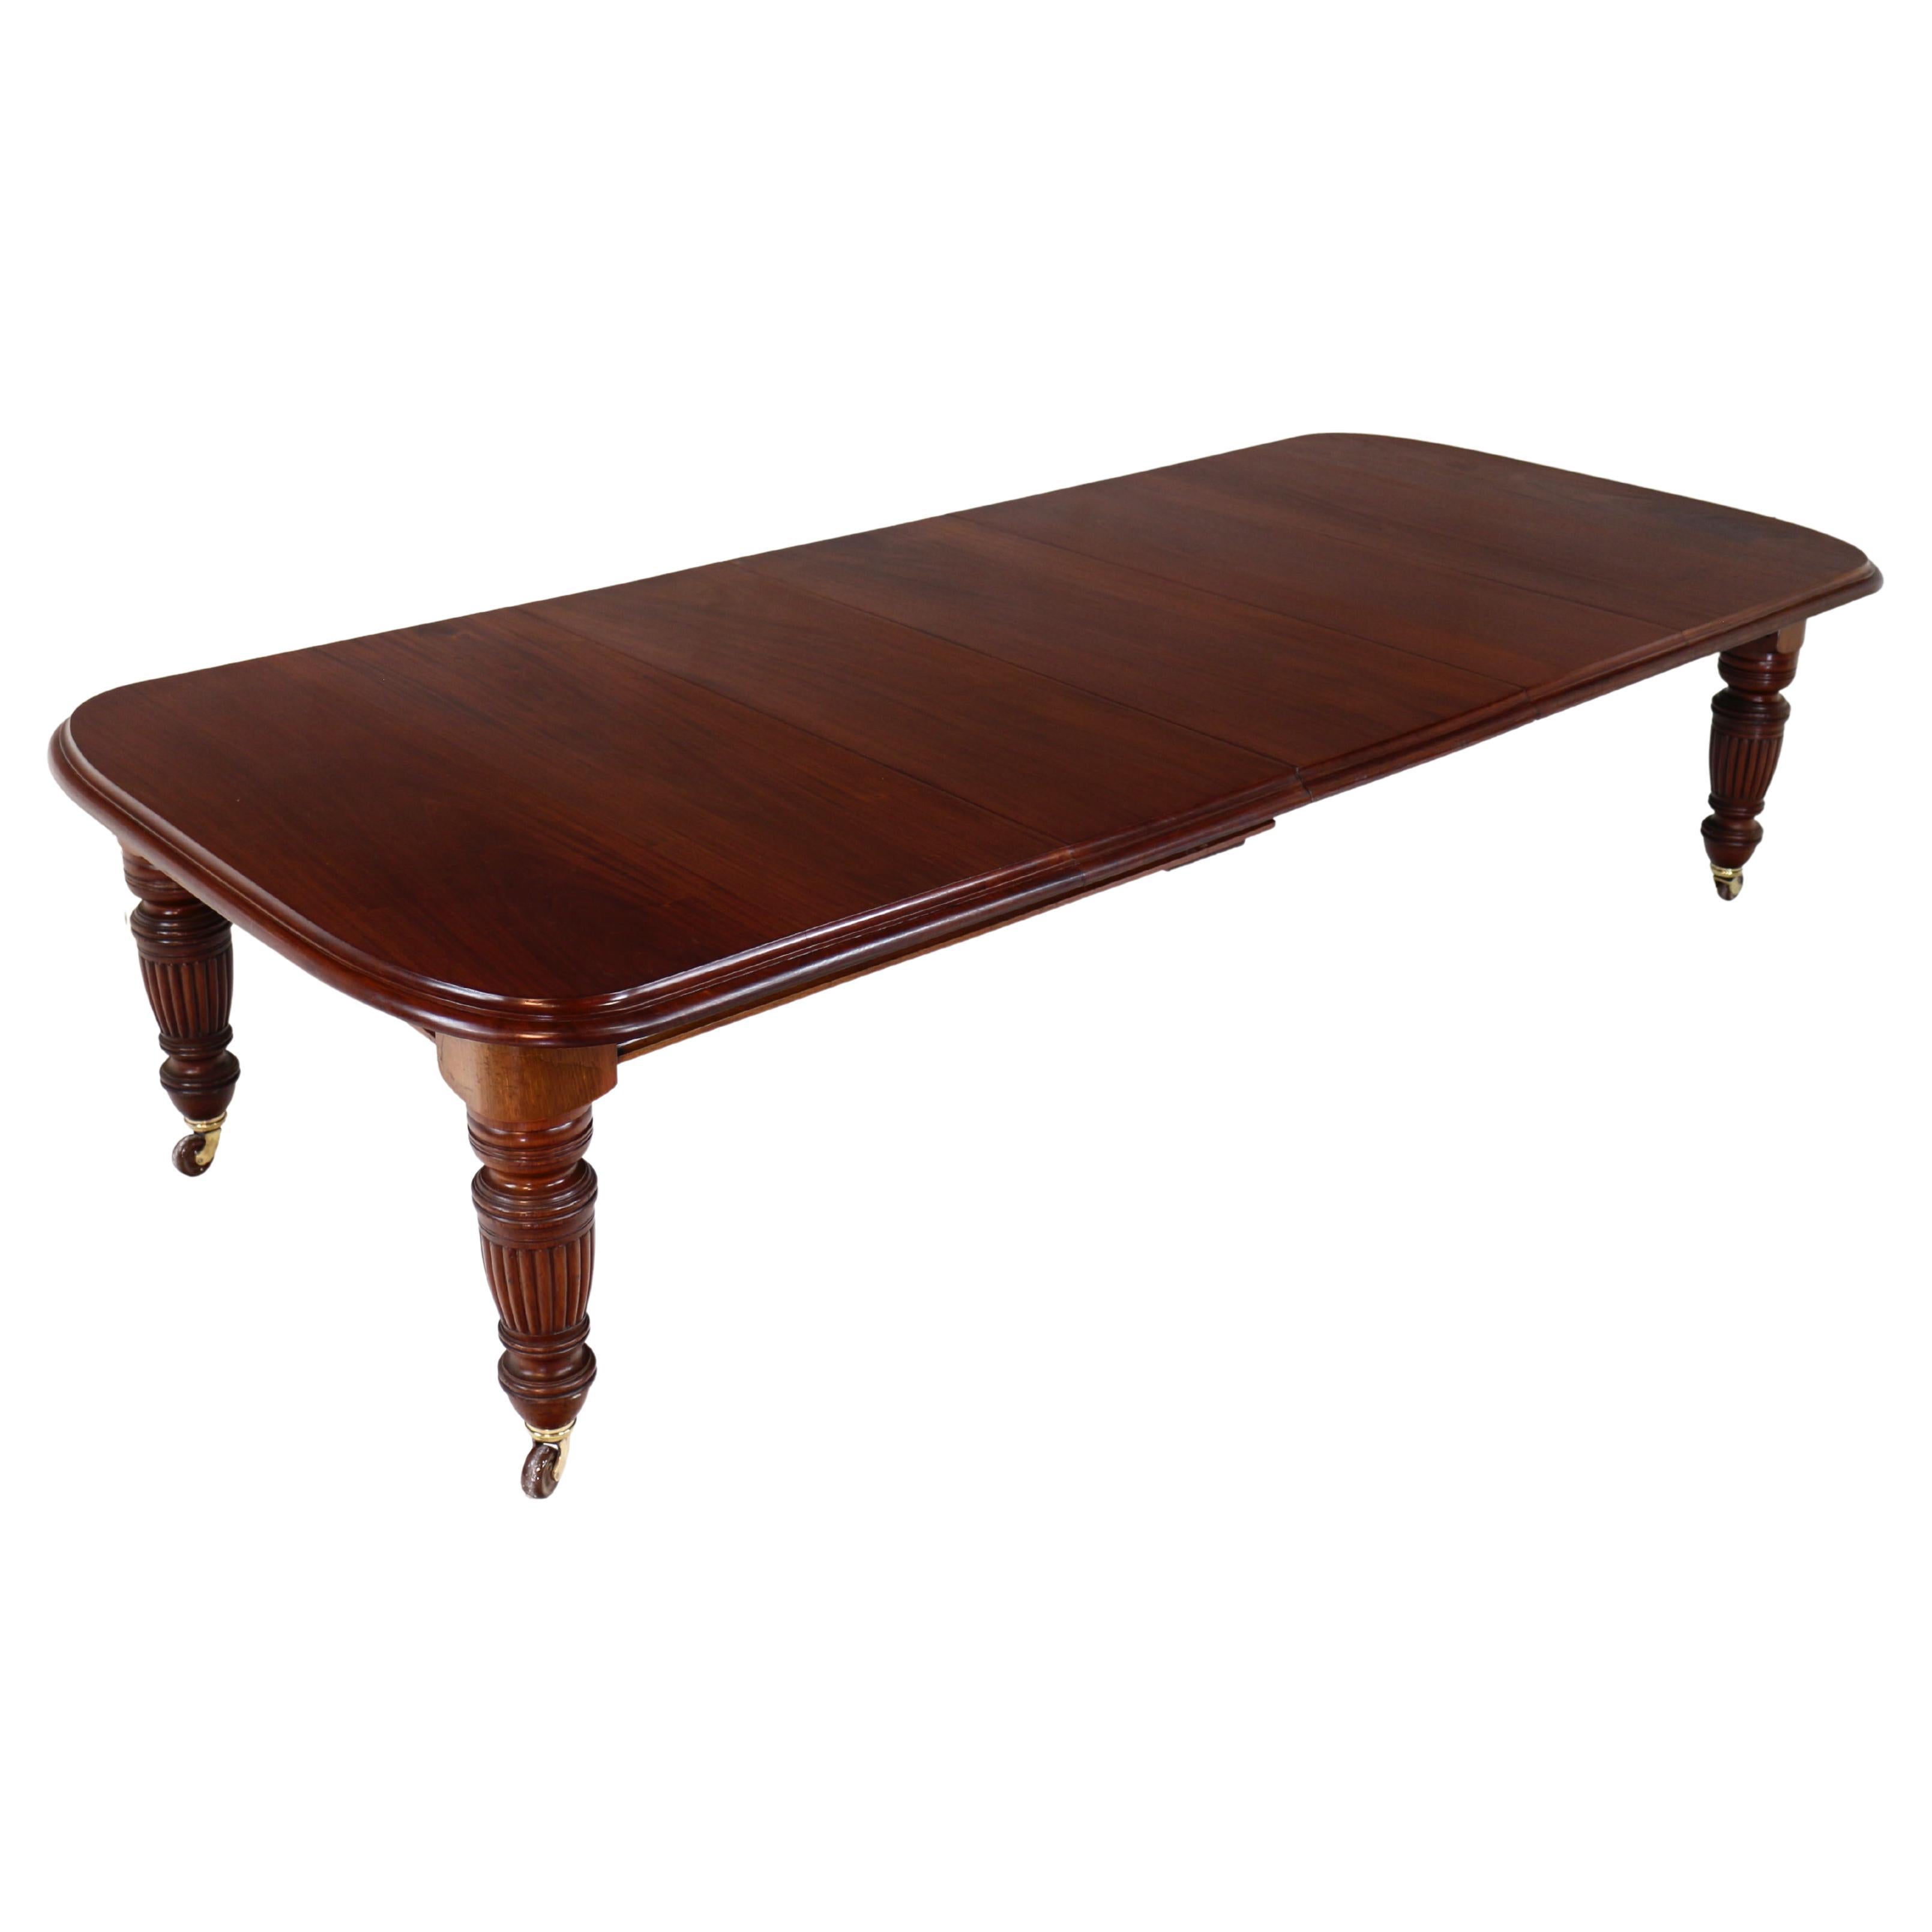 Antique English Victorian Mahogany Extending Dining Table & 3 Leaves, Seats 12 For Sale